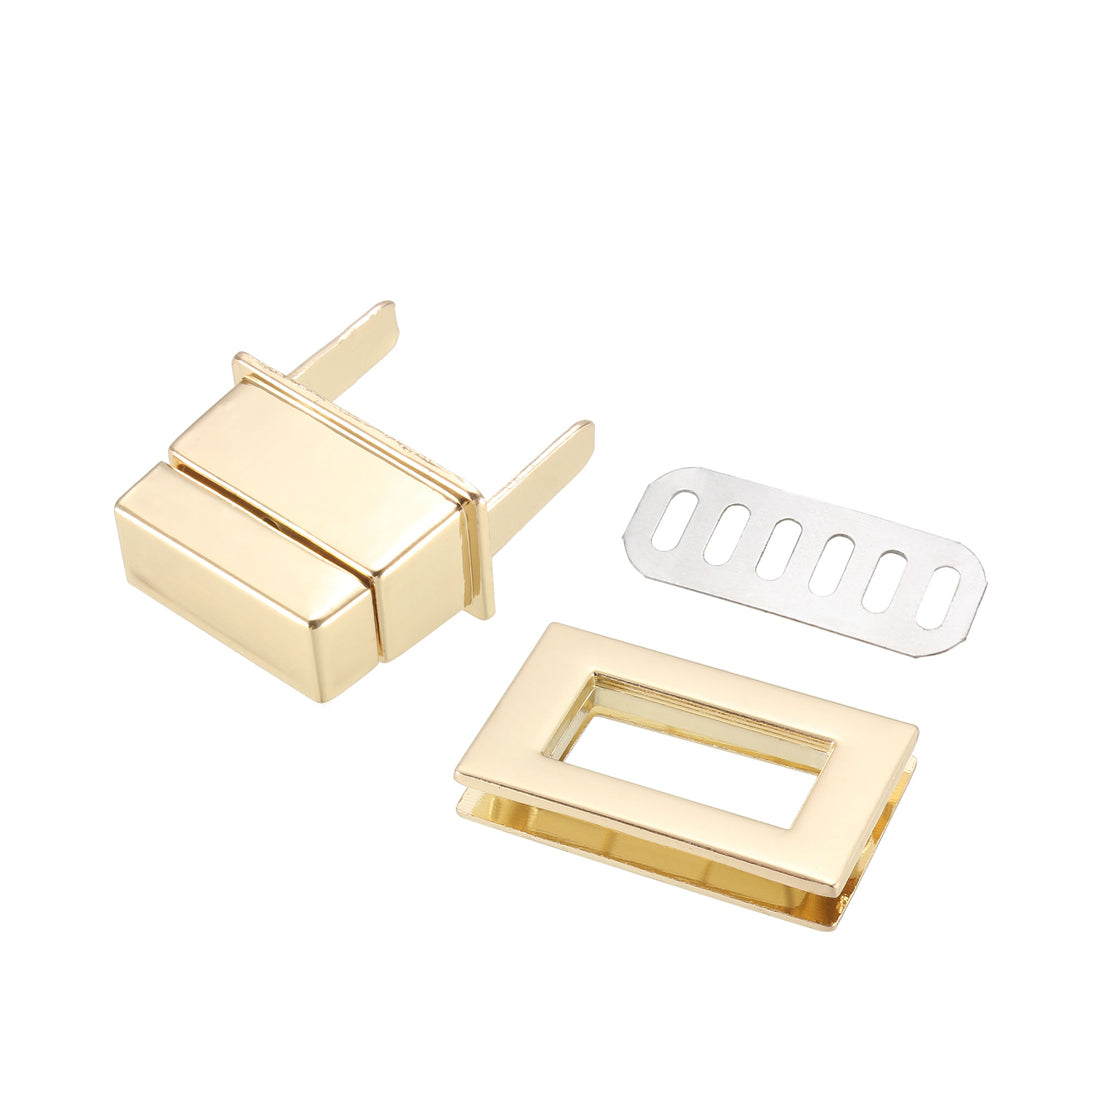 uxcell Uxcell 1 Set Rectangular Purses Twist Lock 32mm x 20mm Clutches Closures for DIY Bag Making - Light Gold